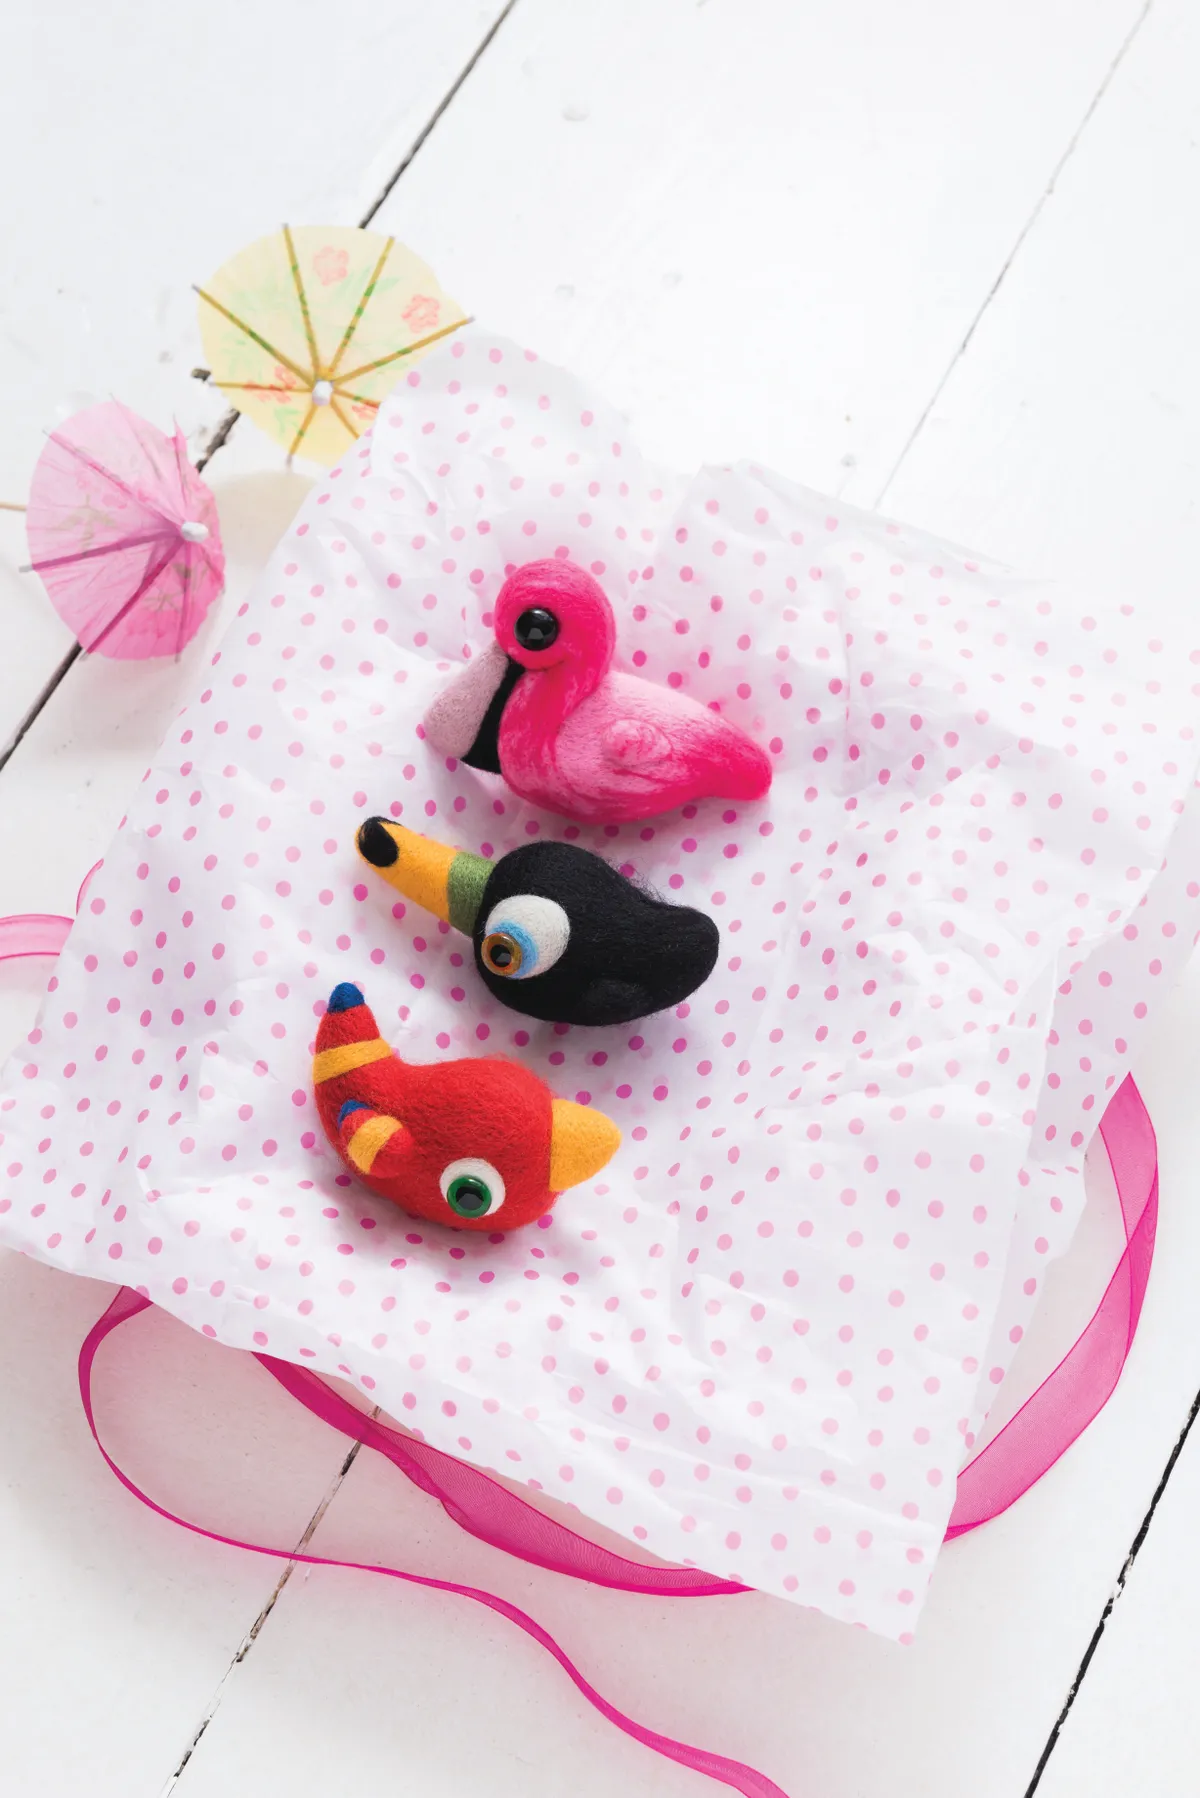 Beginner's guide to needle felting, how to make needle felted birds